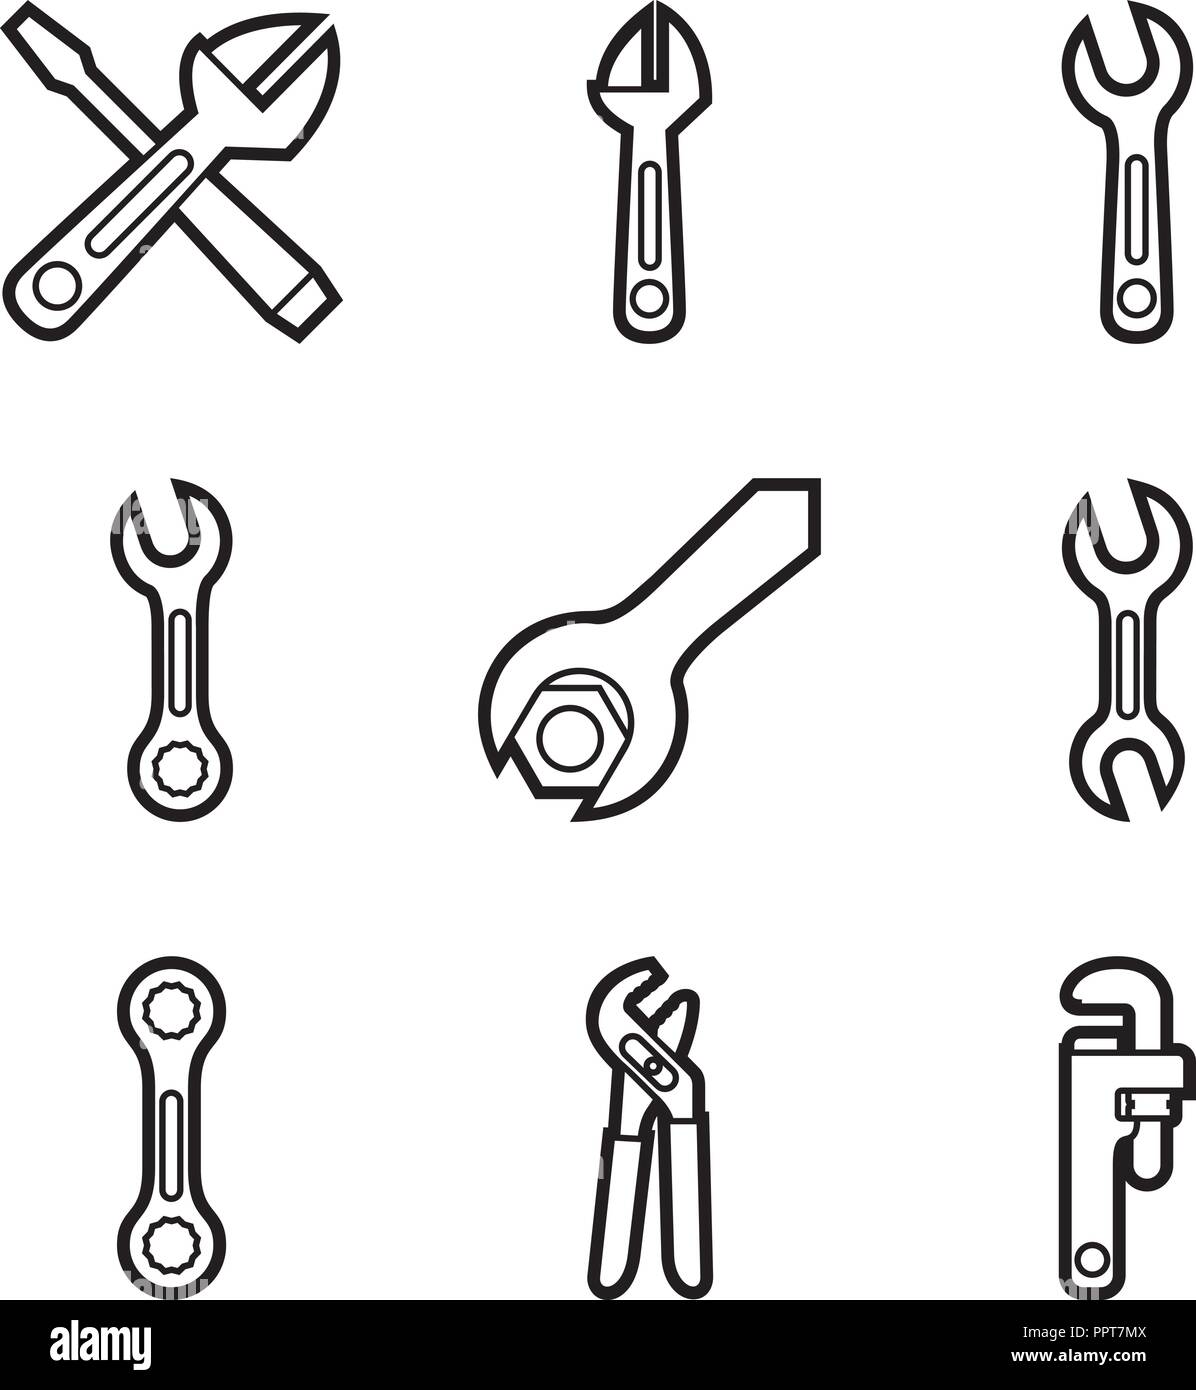 Wrenchs and Pliers Stock Vector